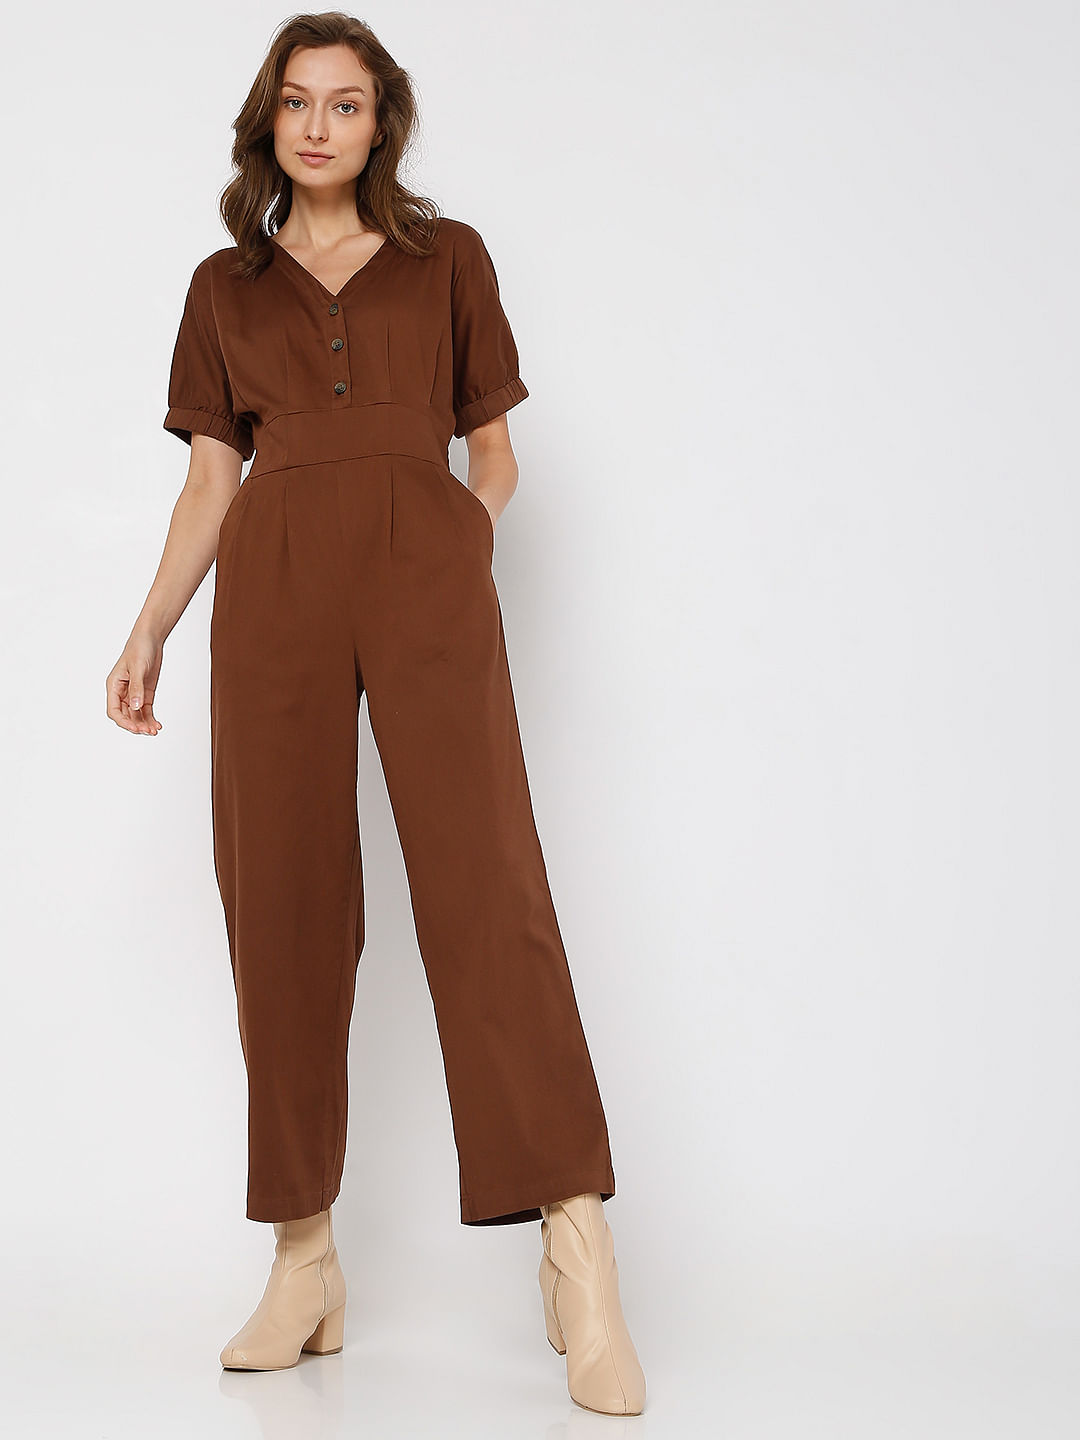 Buy Dresses & Jumpsuits for Women Online at Best Prices - Westside – Page 10